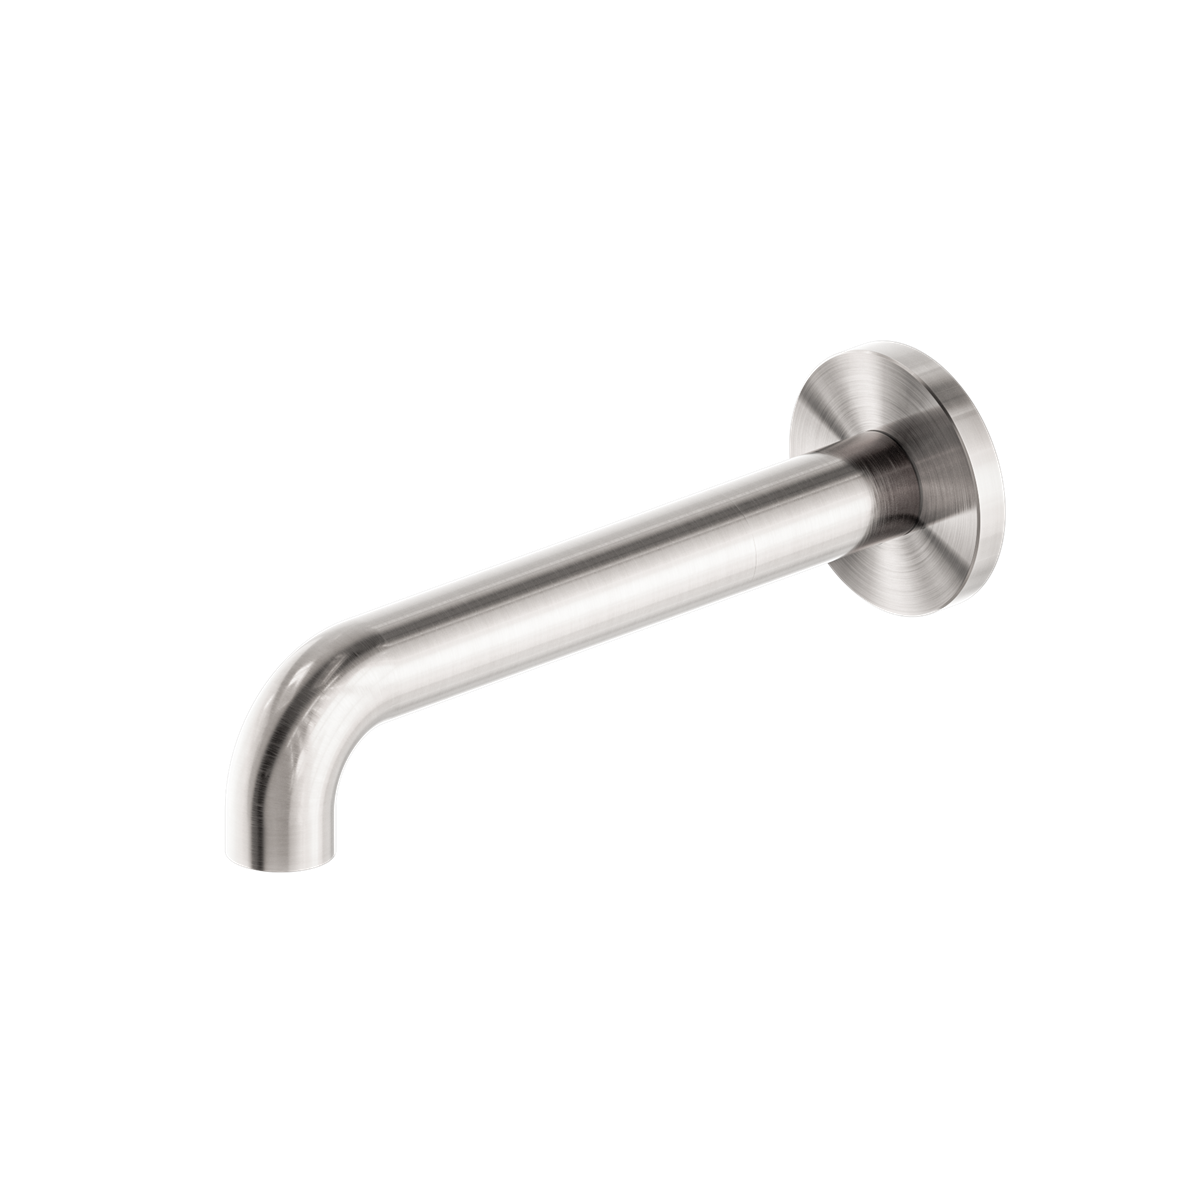 Mecca Basin/Bath Spout Only 160mm Brushed Nickel - NR221903C160BN